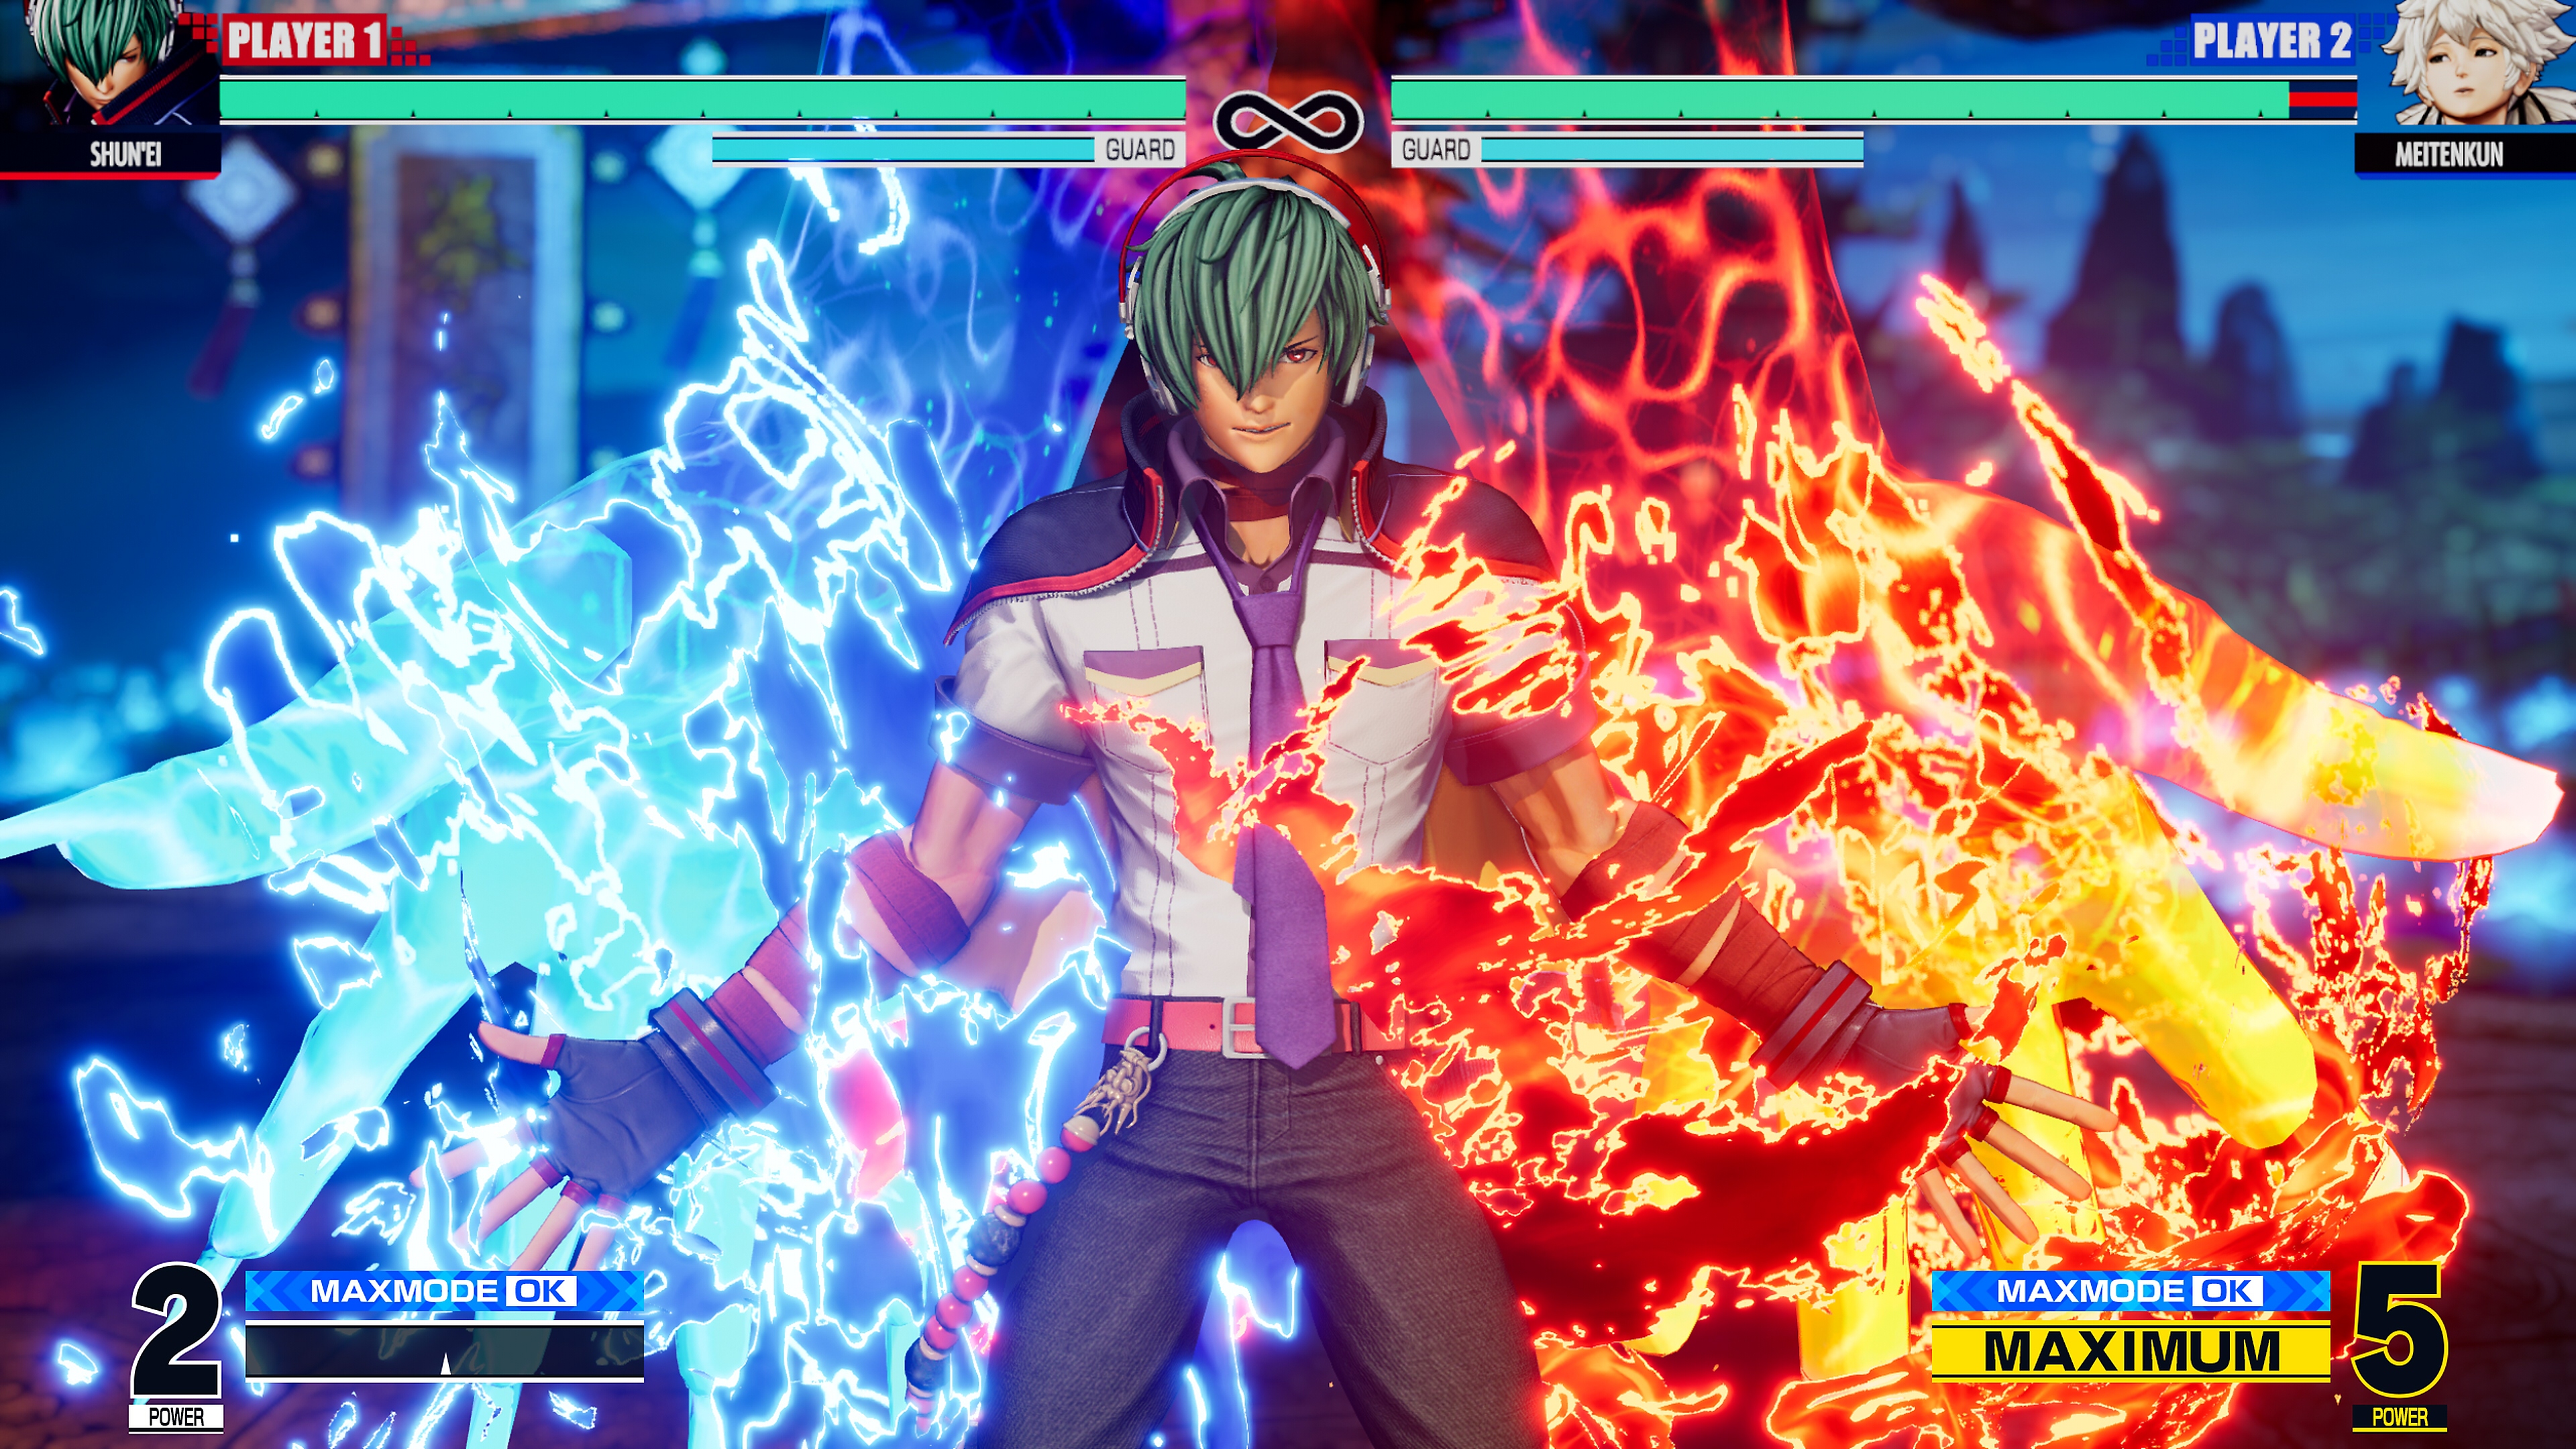 The King of Fighters XV - Gallery Screenshot 1